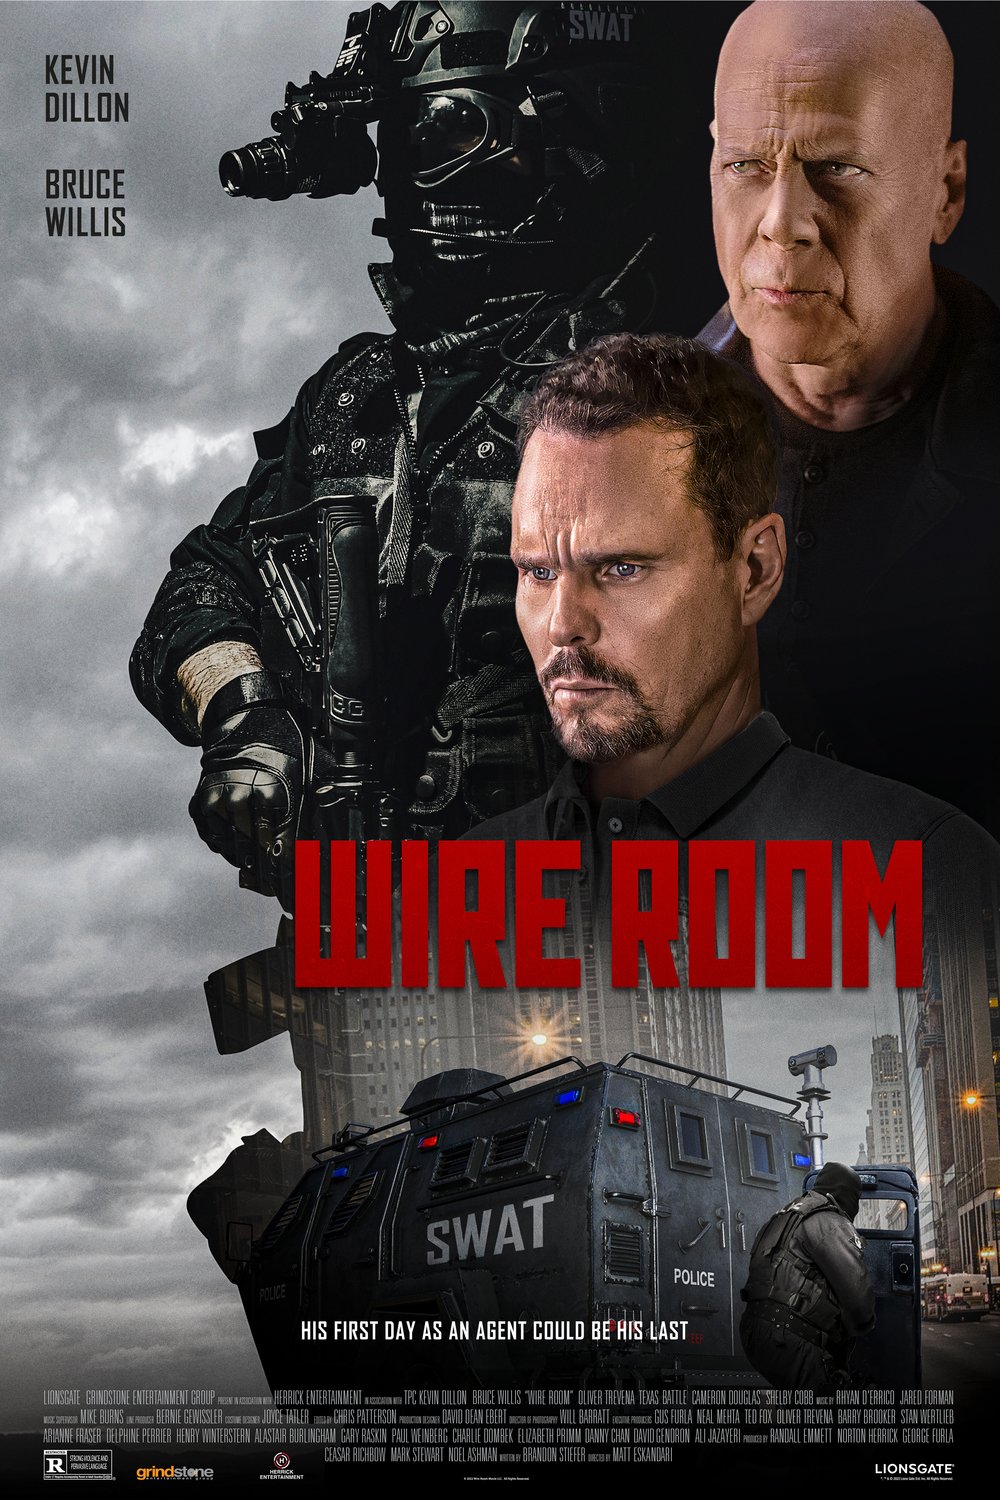 Poster of the movie Wire Room